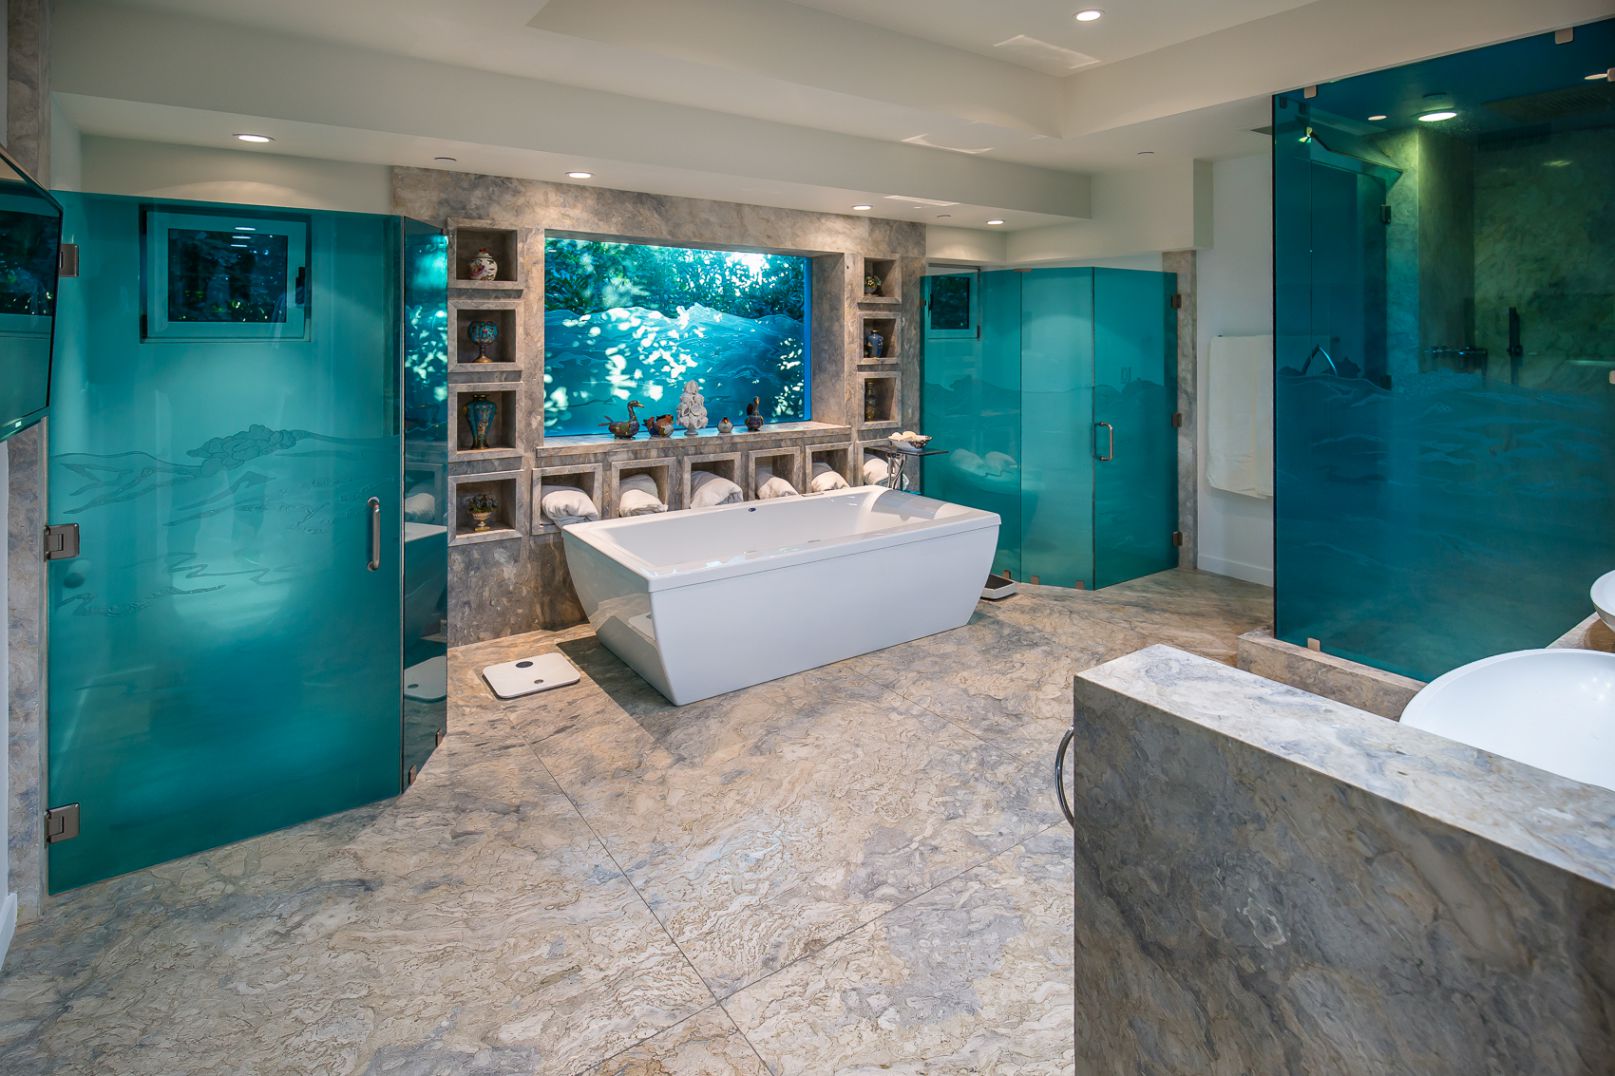 Bathroom paint colors that are trendy in 2023 will also include blue and marine green tones. Blues and teals seem like the ocean when combined, especially the deep, jewel tones. Choose pastel colors for a softer seaside aesthetic. Bathrooms feel as clean and fresh as a sea breeze when these colors are used together.